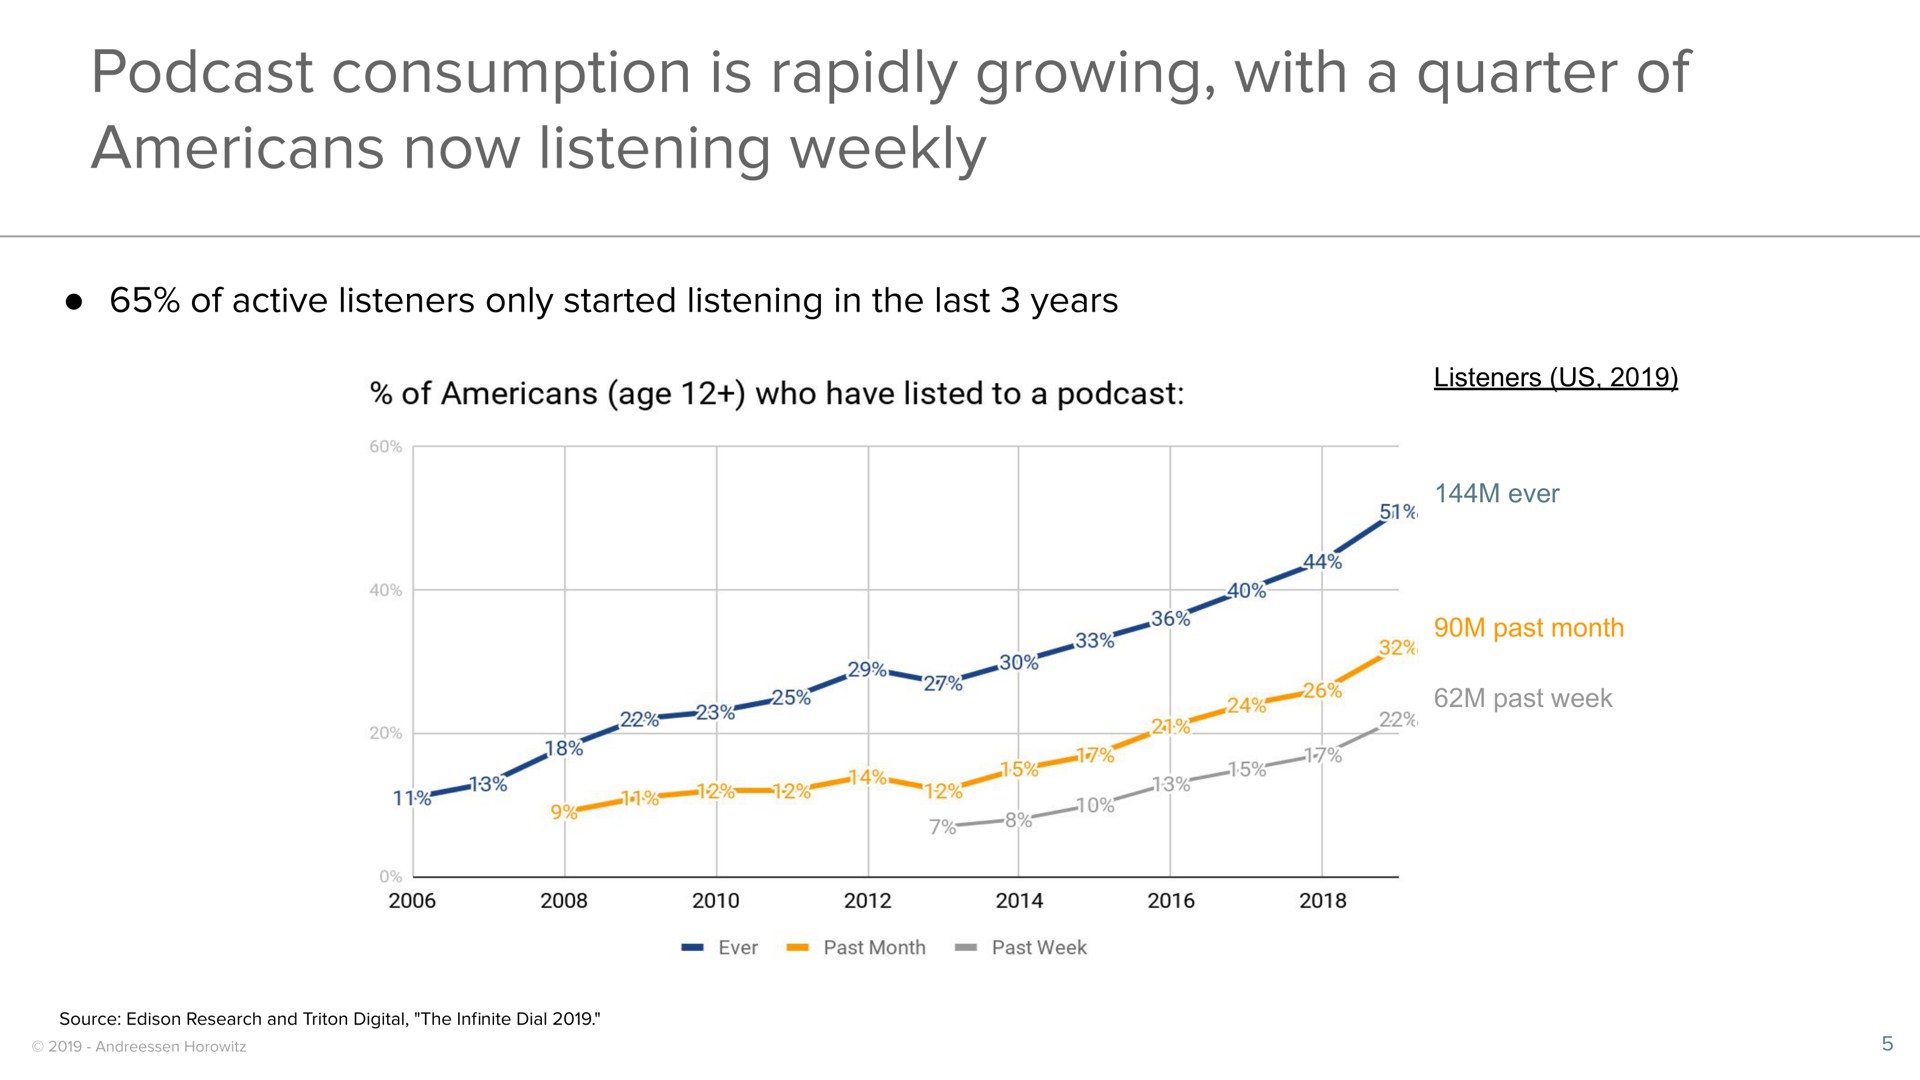 listeners us ever past month past week consumption is rapidly growing with a quarter of now listening weekly | a16z